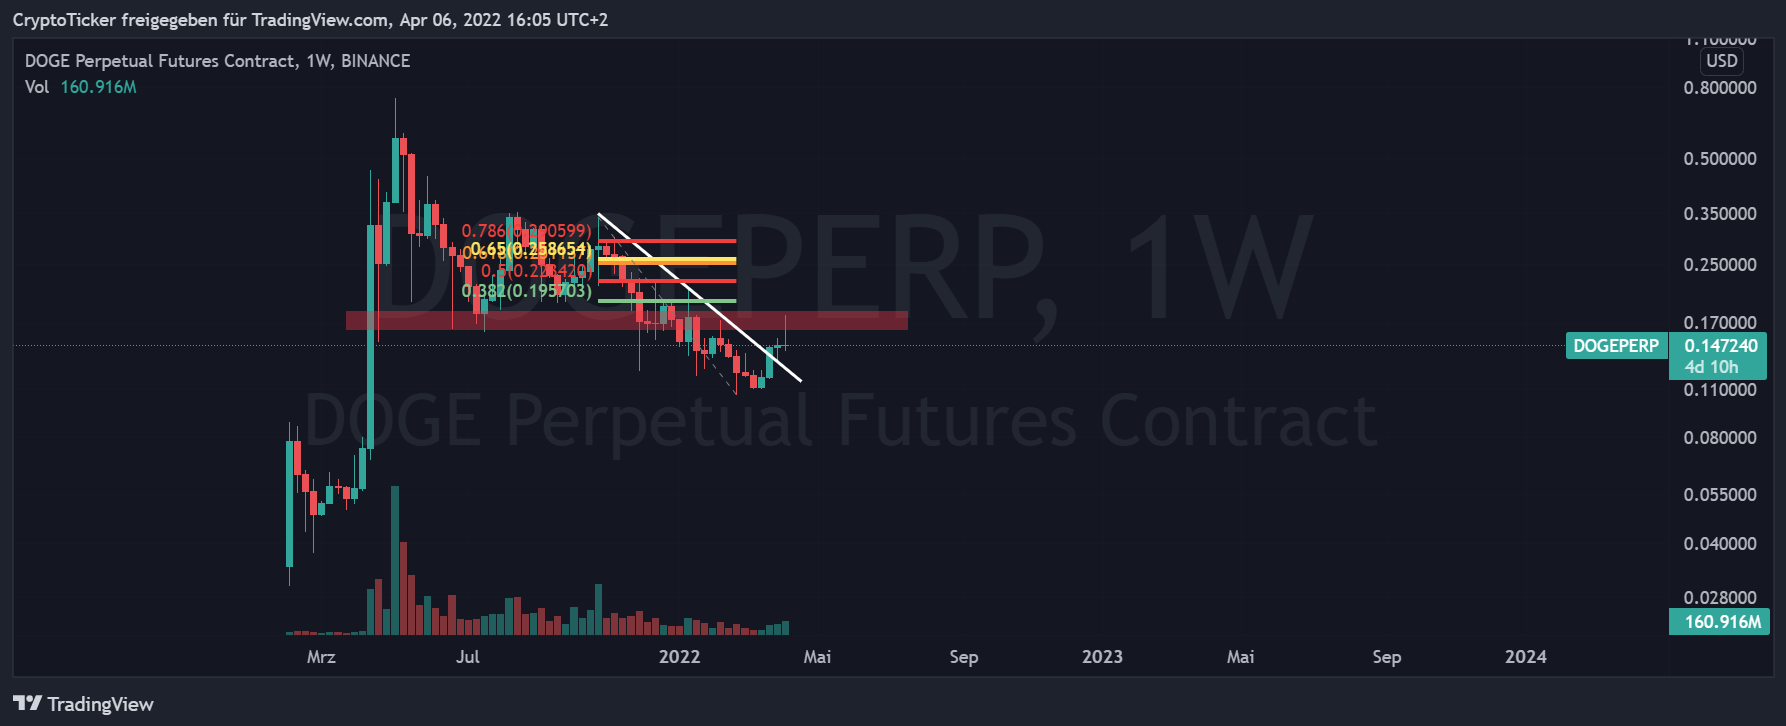 DOGE/PERP 1-week chart showing the Fib retracement of DOGE